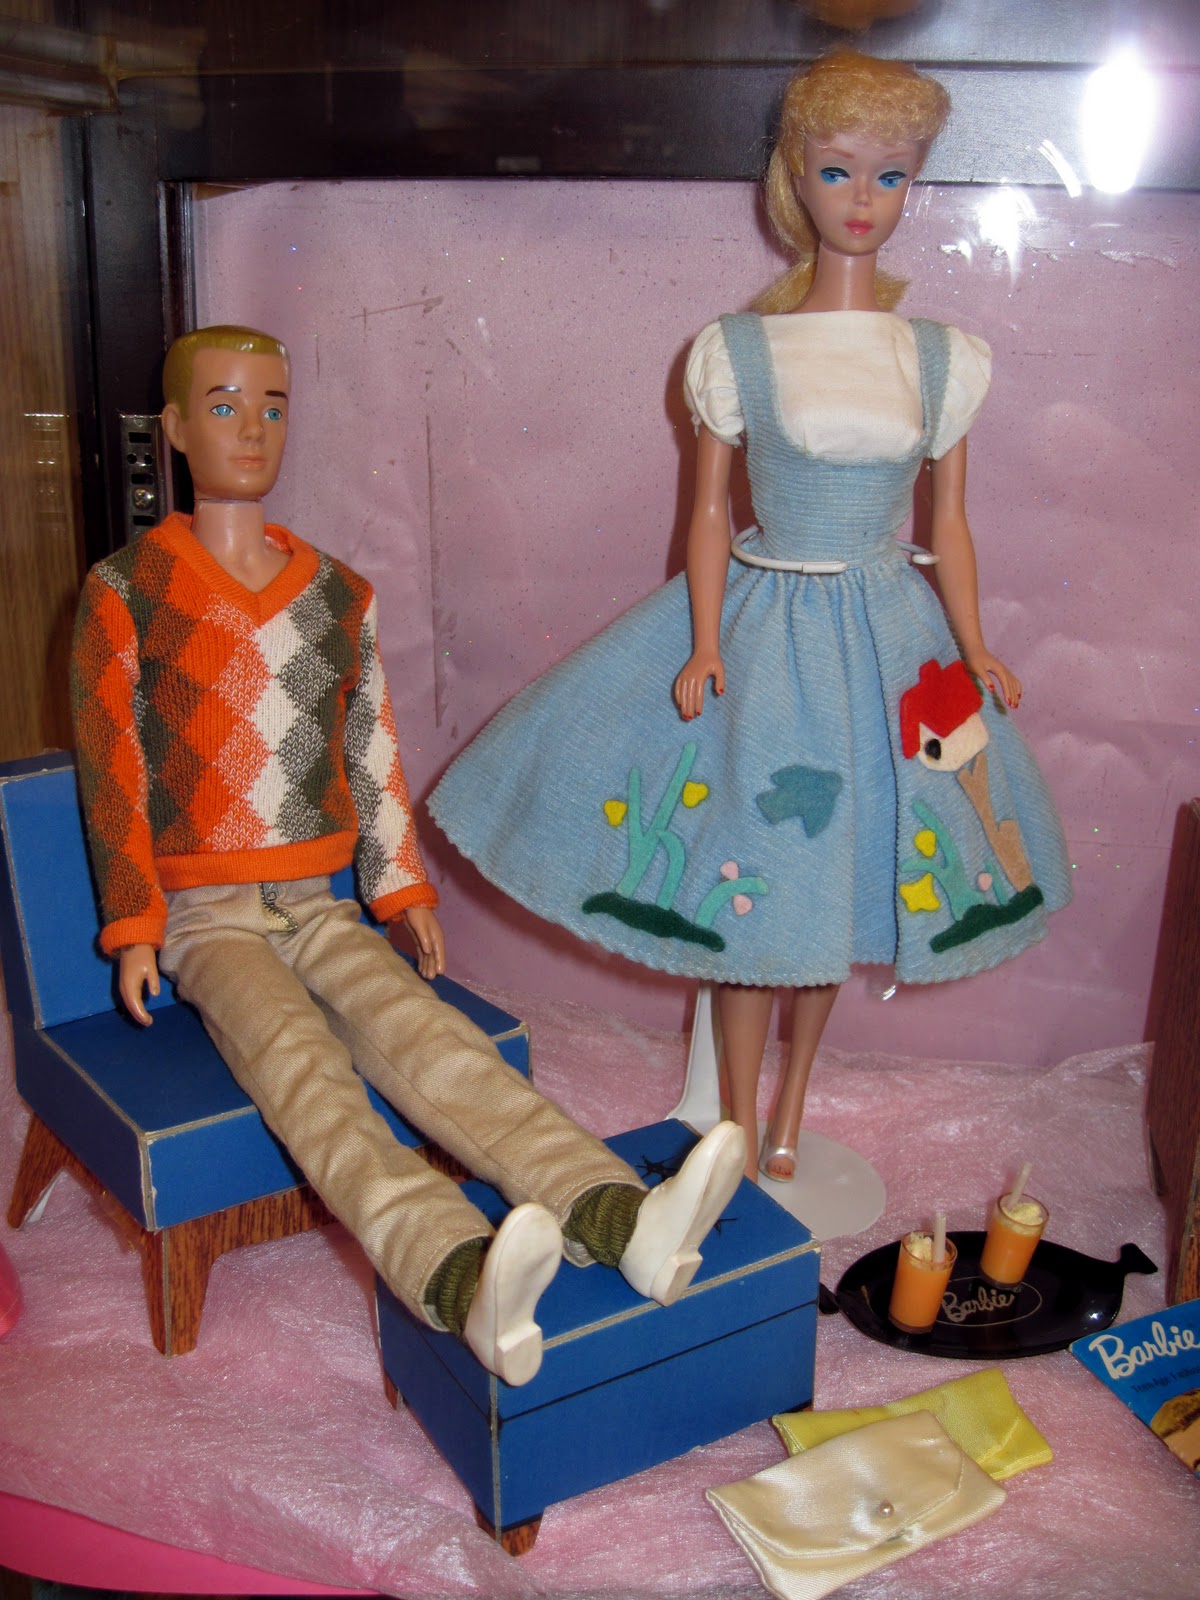 Tracy's Toys (and Some Other Stuff): Vintage Barbie Display